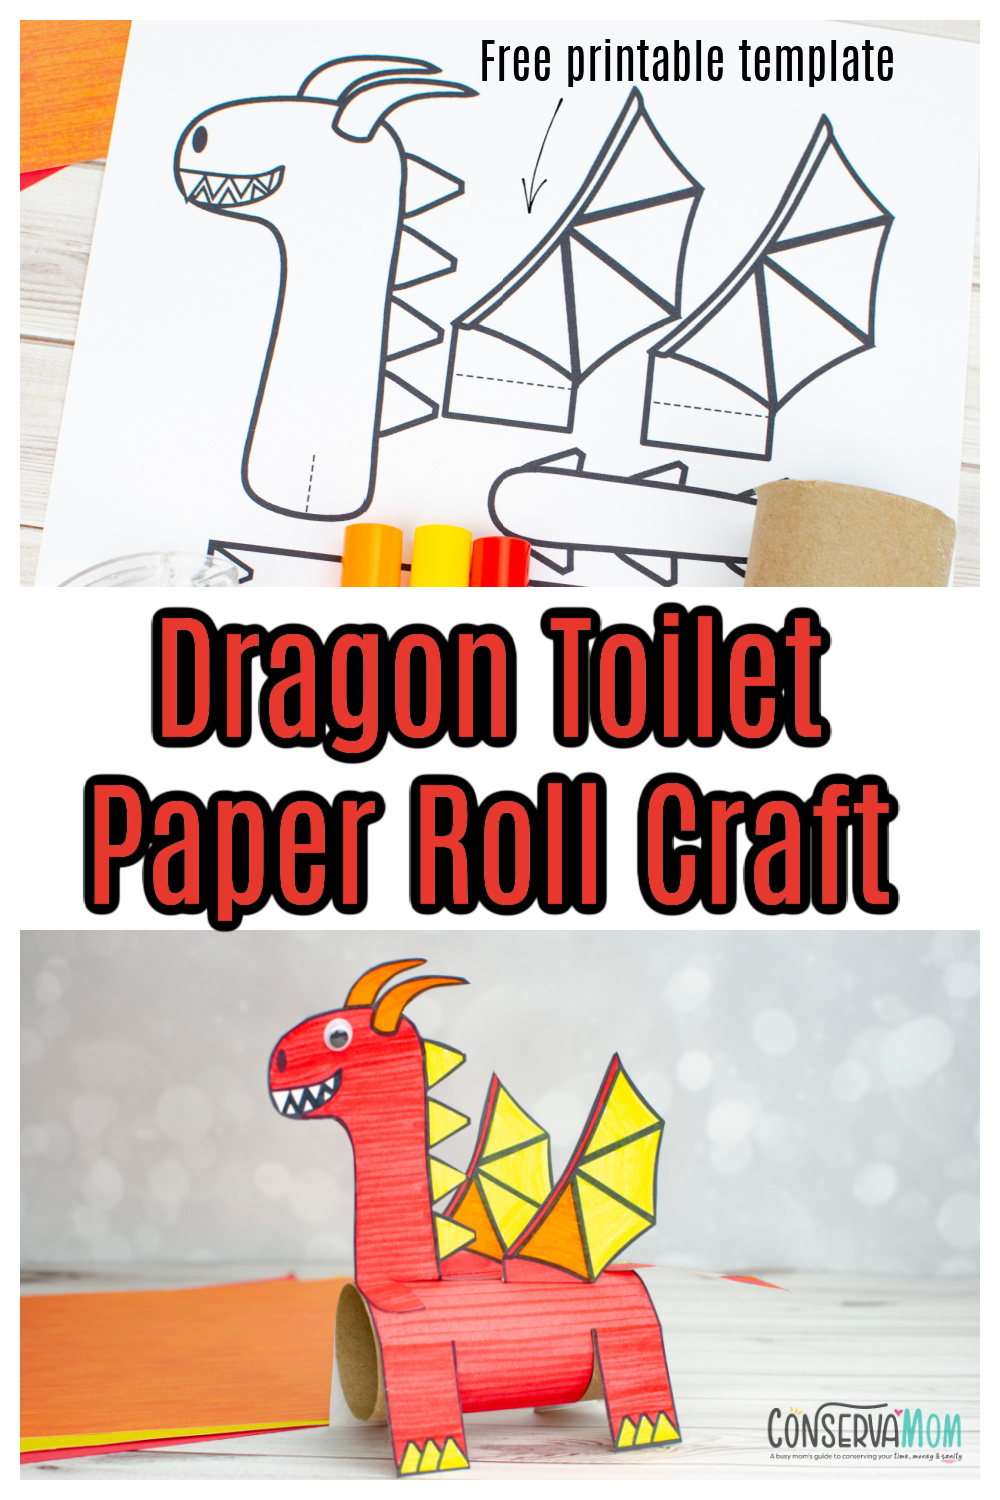 Dragon Toilet paper roll craft